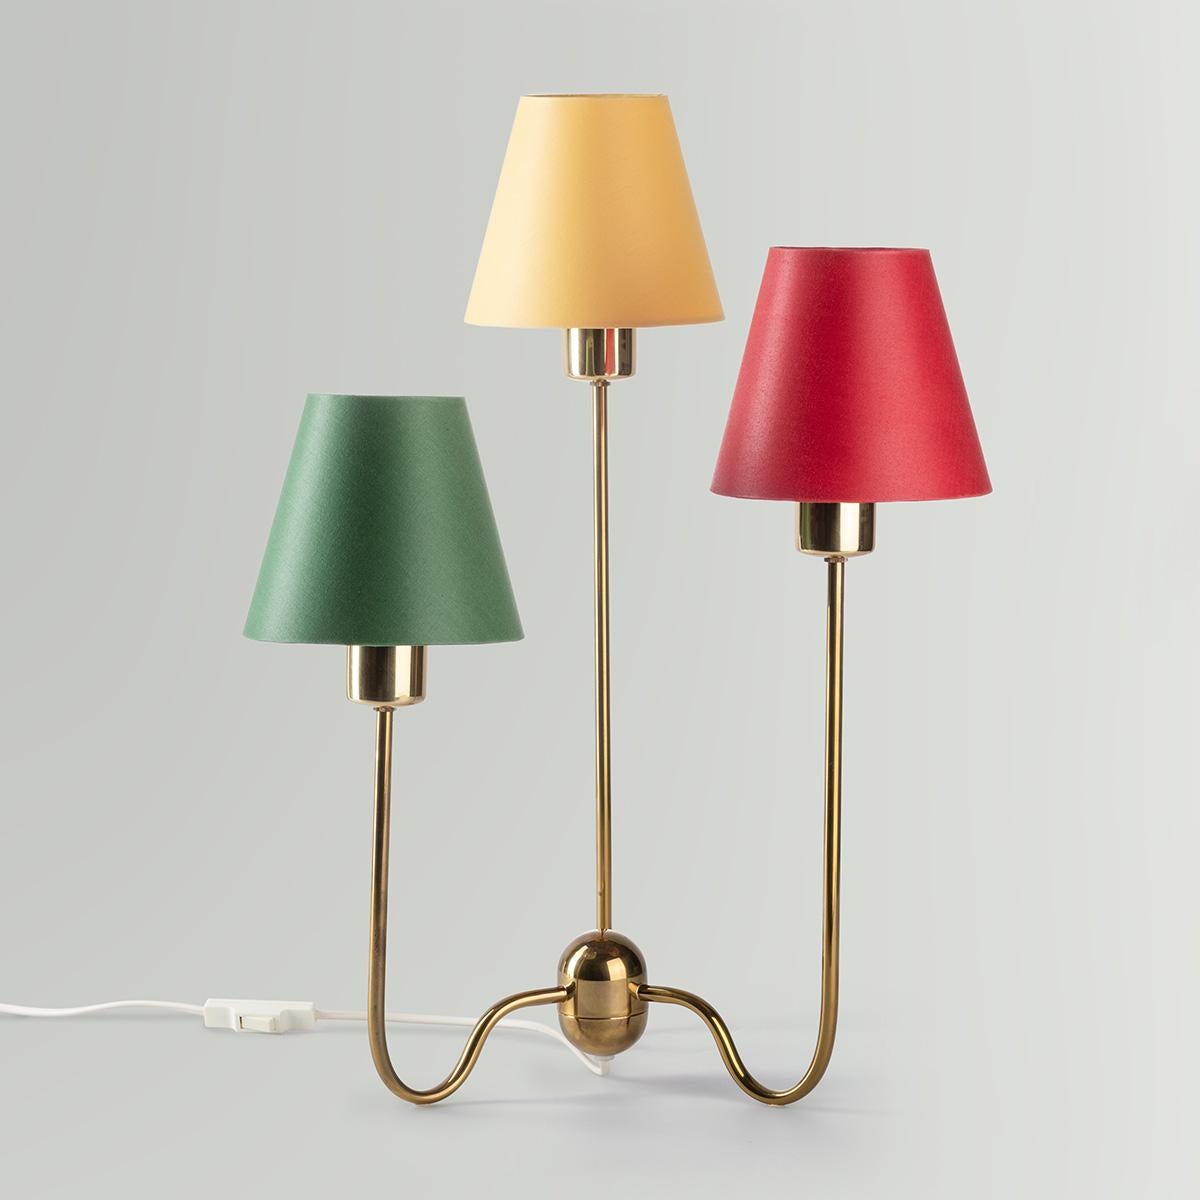 Rare 3-armed brass table lamp, model 2468 (also known as the 